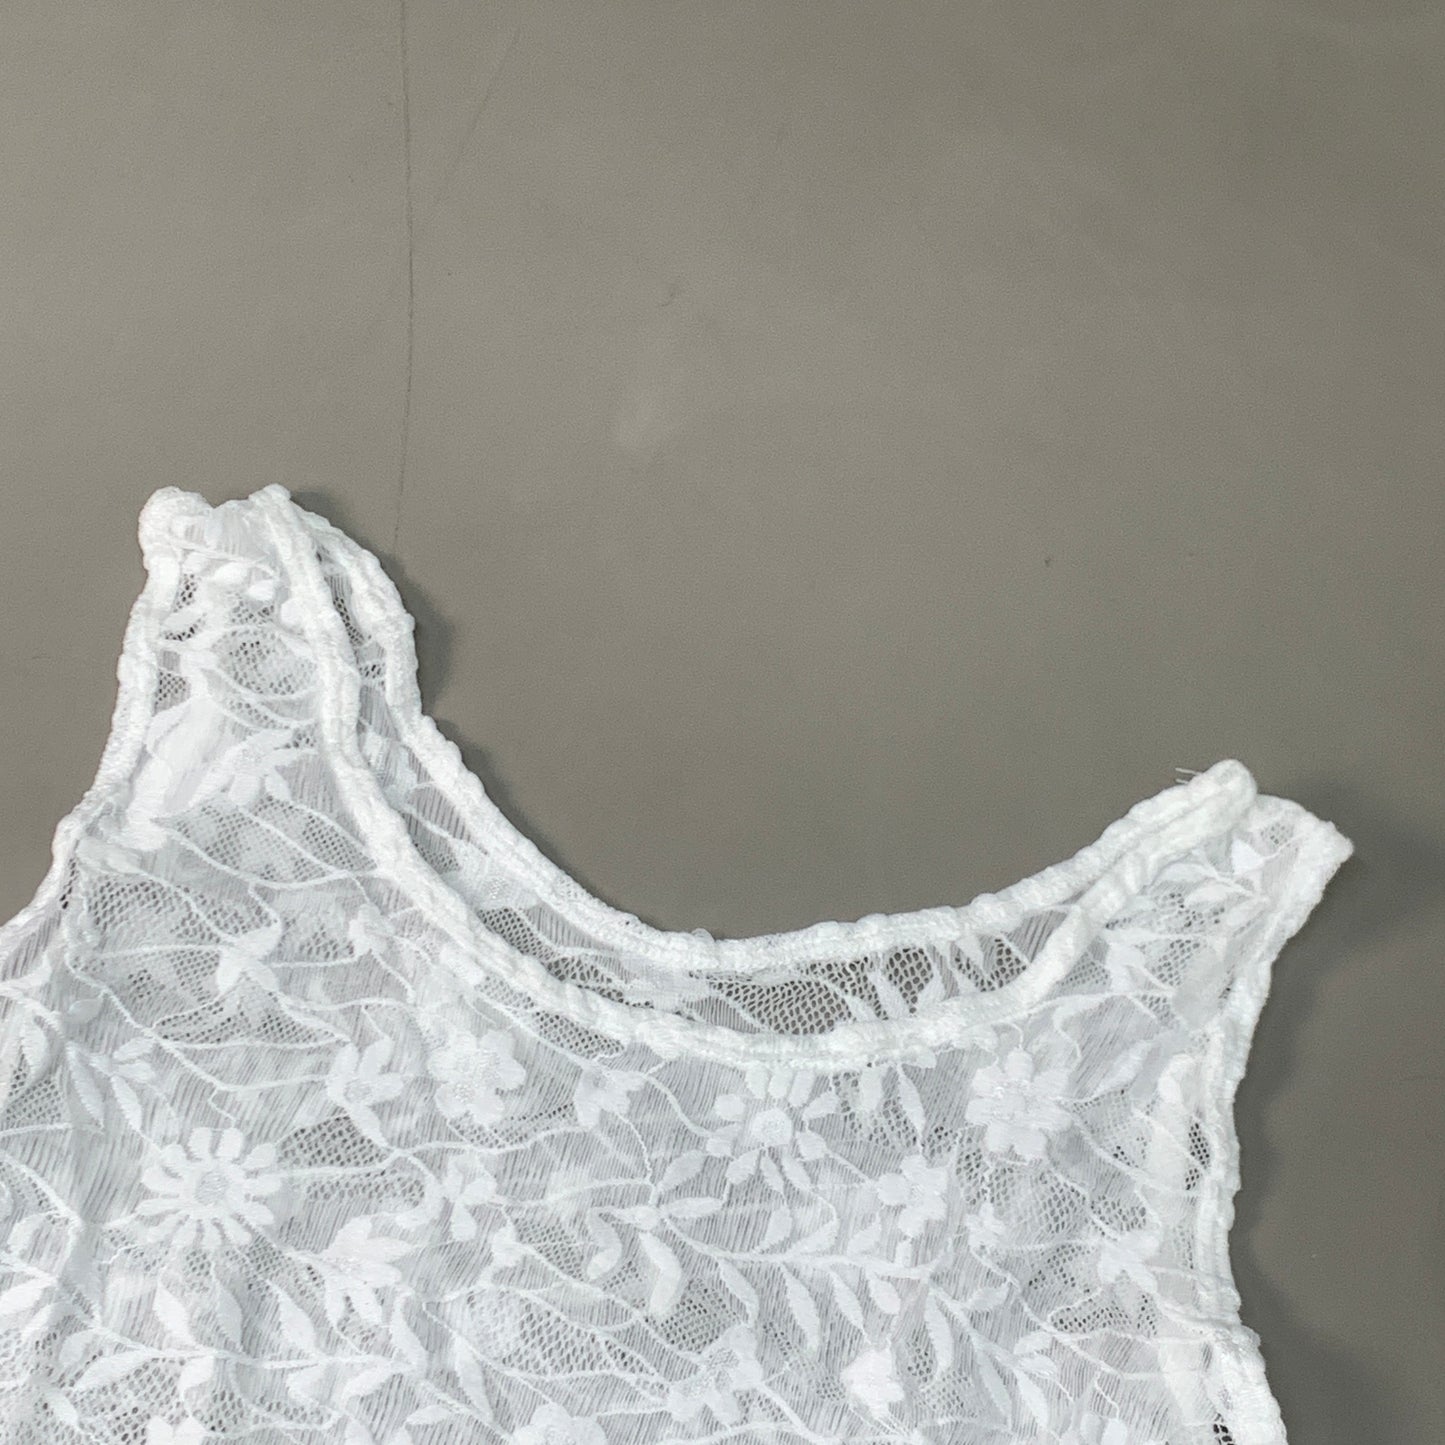 HALFTEE Full Lace Tank Nylon & Spandex Blend Floral White XS (23)